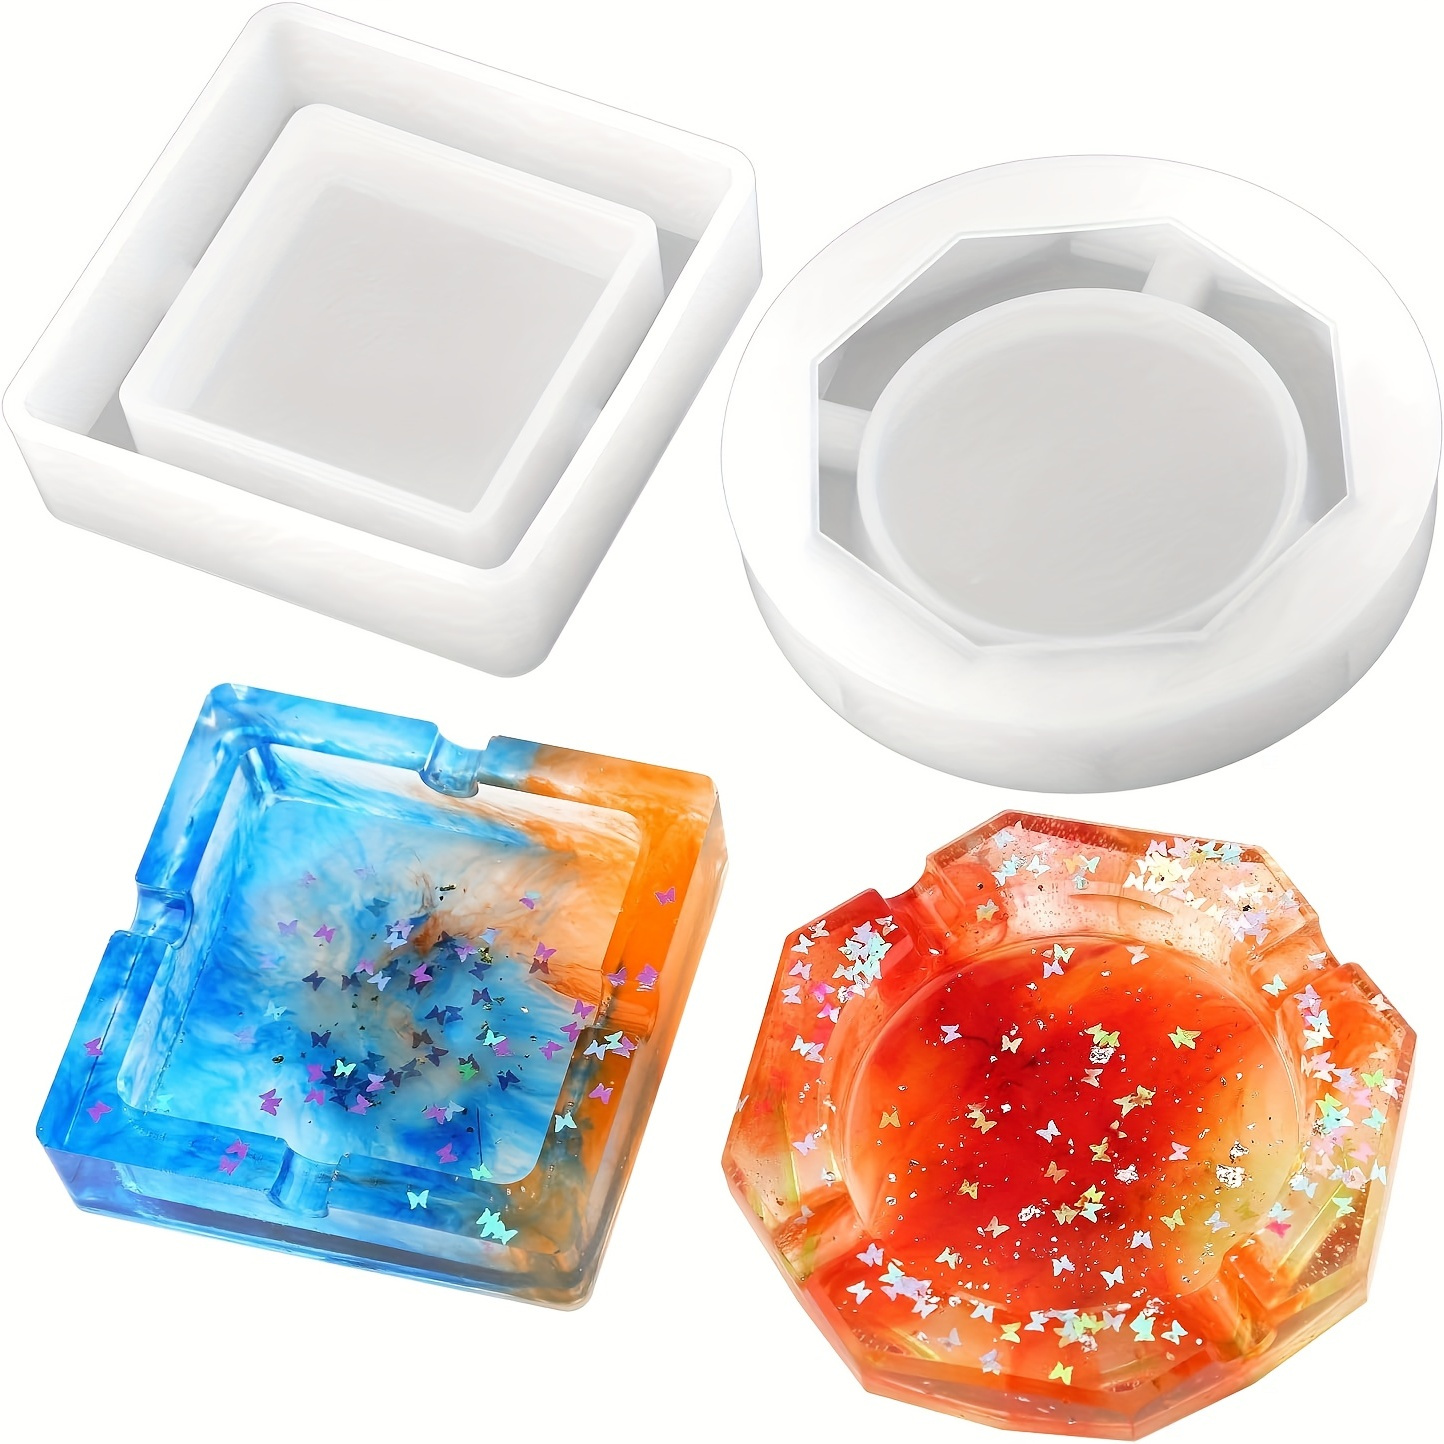  Silicone Resin Tray Mold,Large Irregular Tray Mold Epoxy Resin  Mold with 2 Metal Handles Easy Demold Silicon Coaster molds for Making Faux  Agate Tray,Serving Board,Fruit Tray,etc,L : Arts, Crafts & Sewing